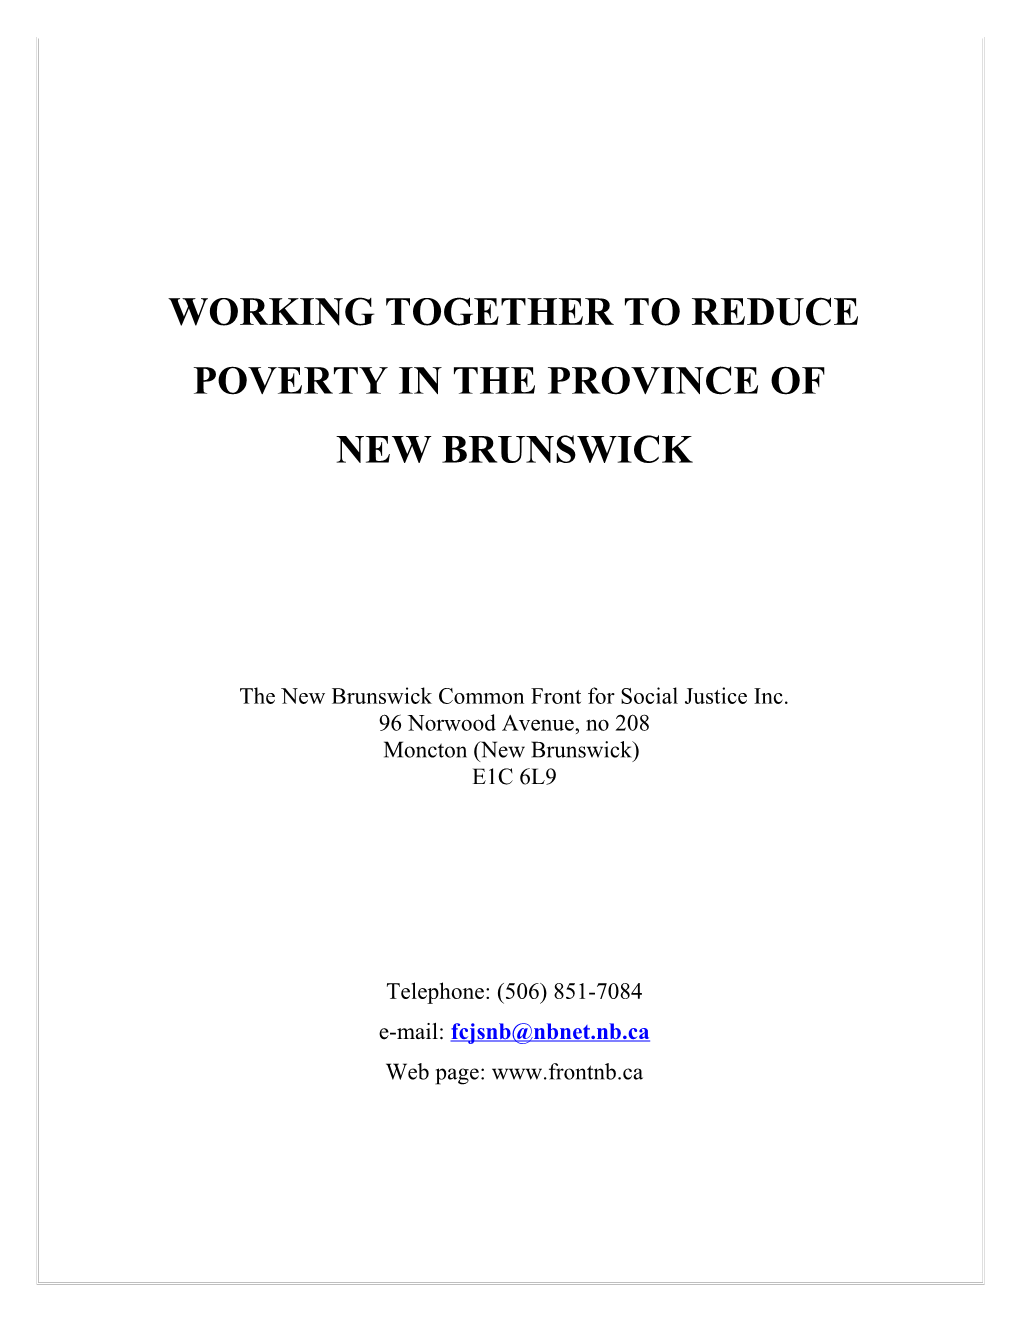 Issues Contributing to Poverty in New Brunswick